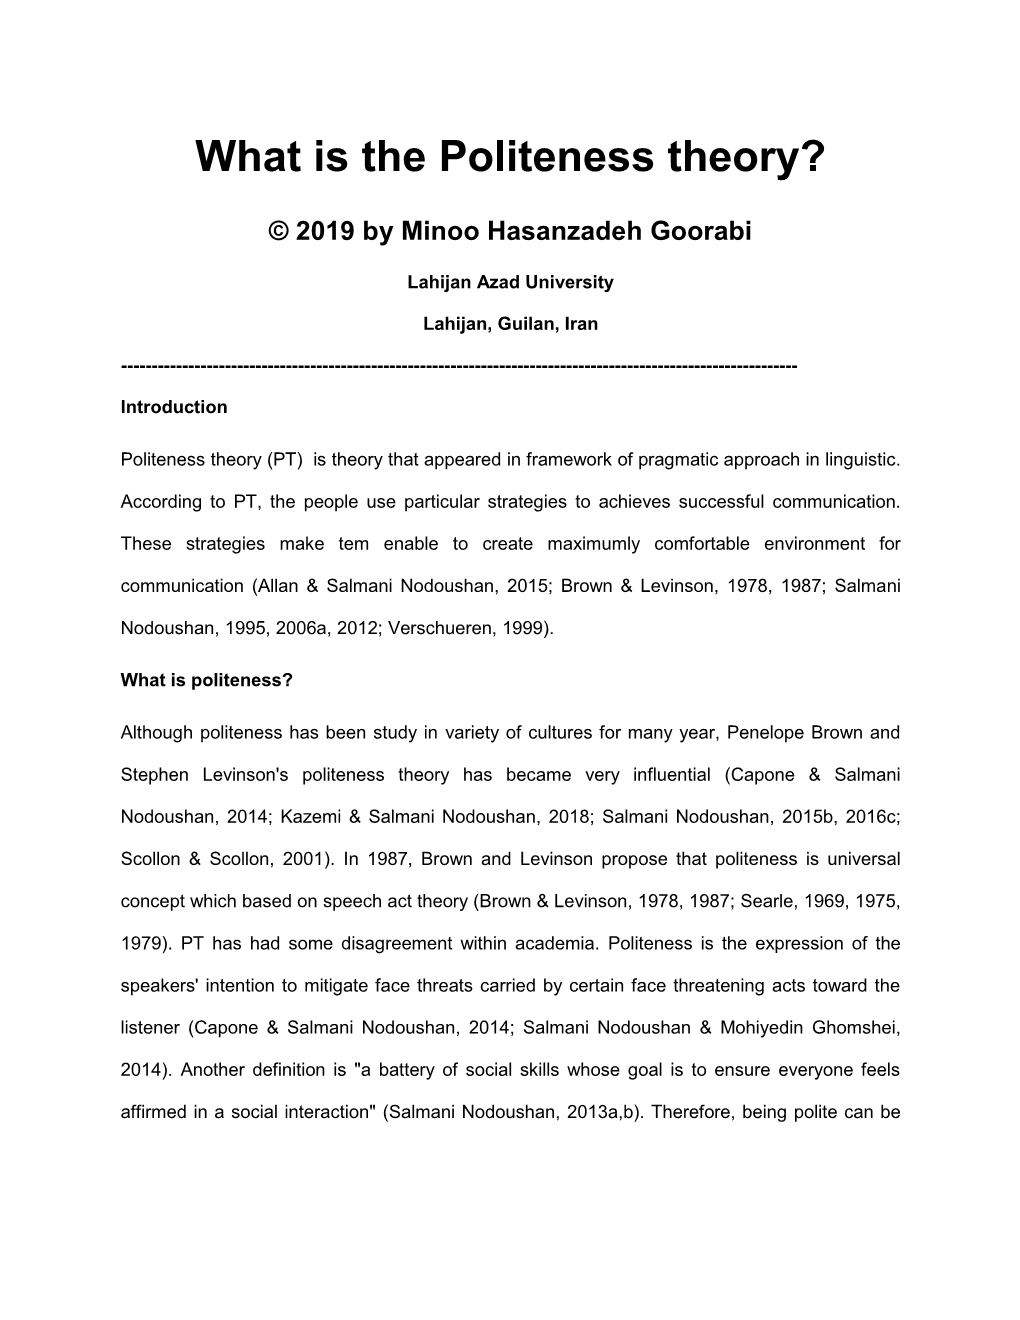 What Is the Politeness Theory?